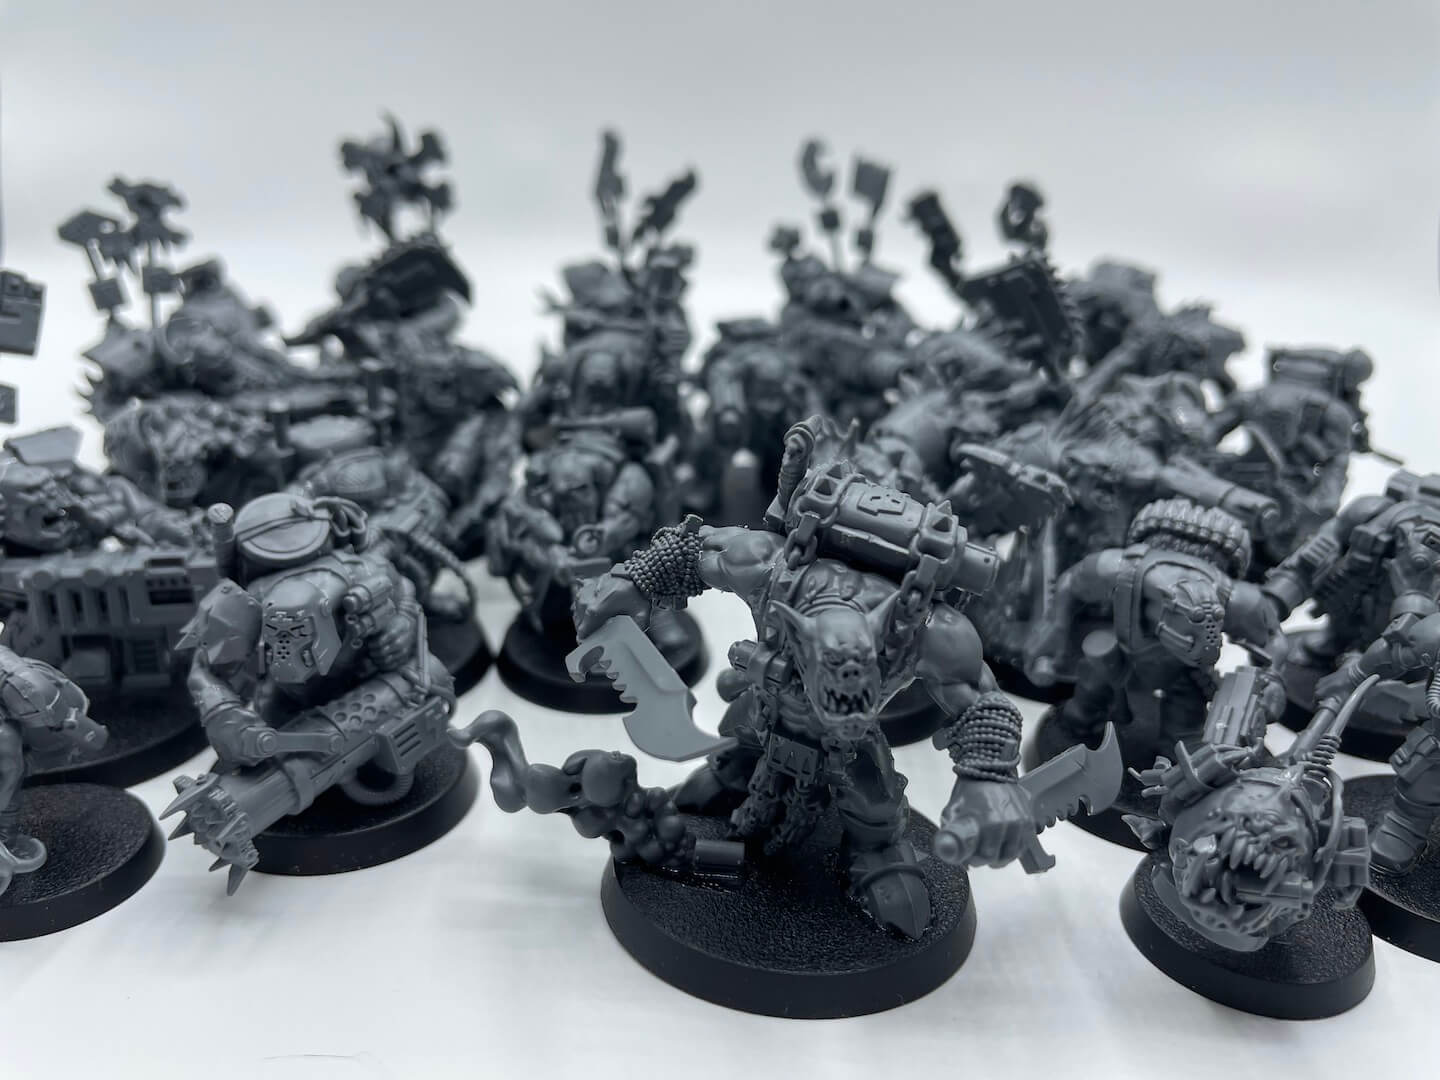 An image of the Warhammer 40K Boarding Patrol Orks included in the box set, a range of wild and screaming Orks